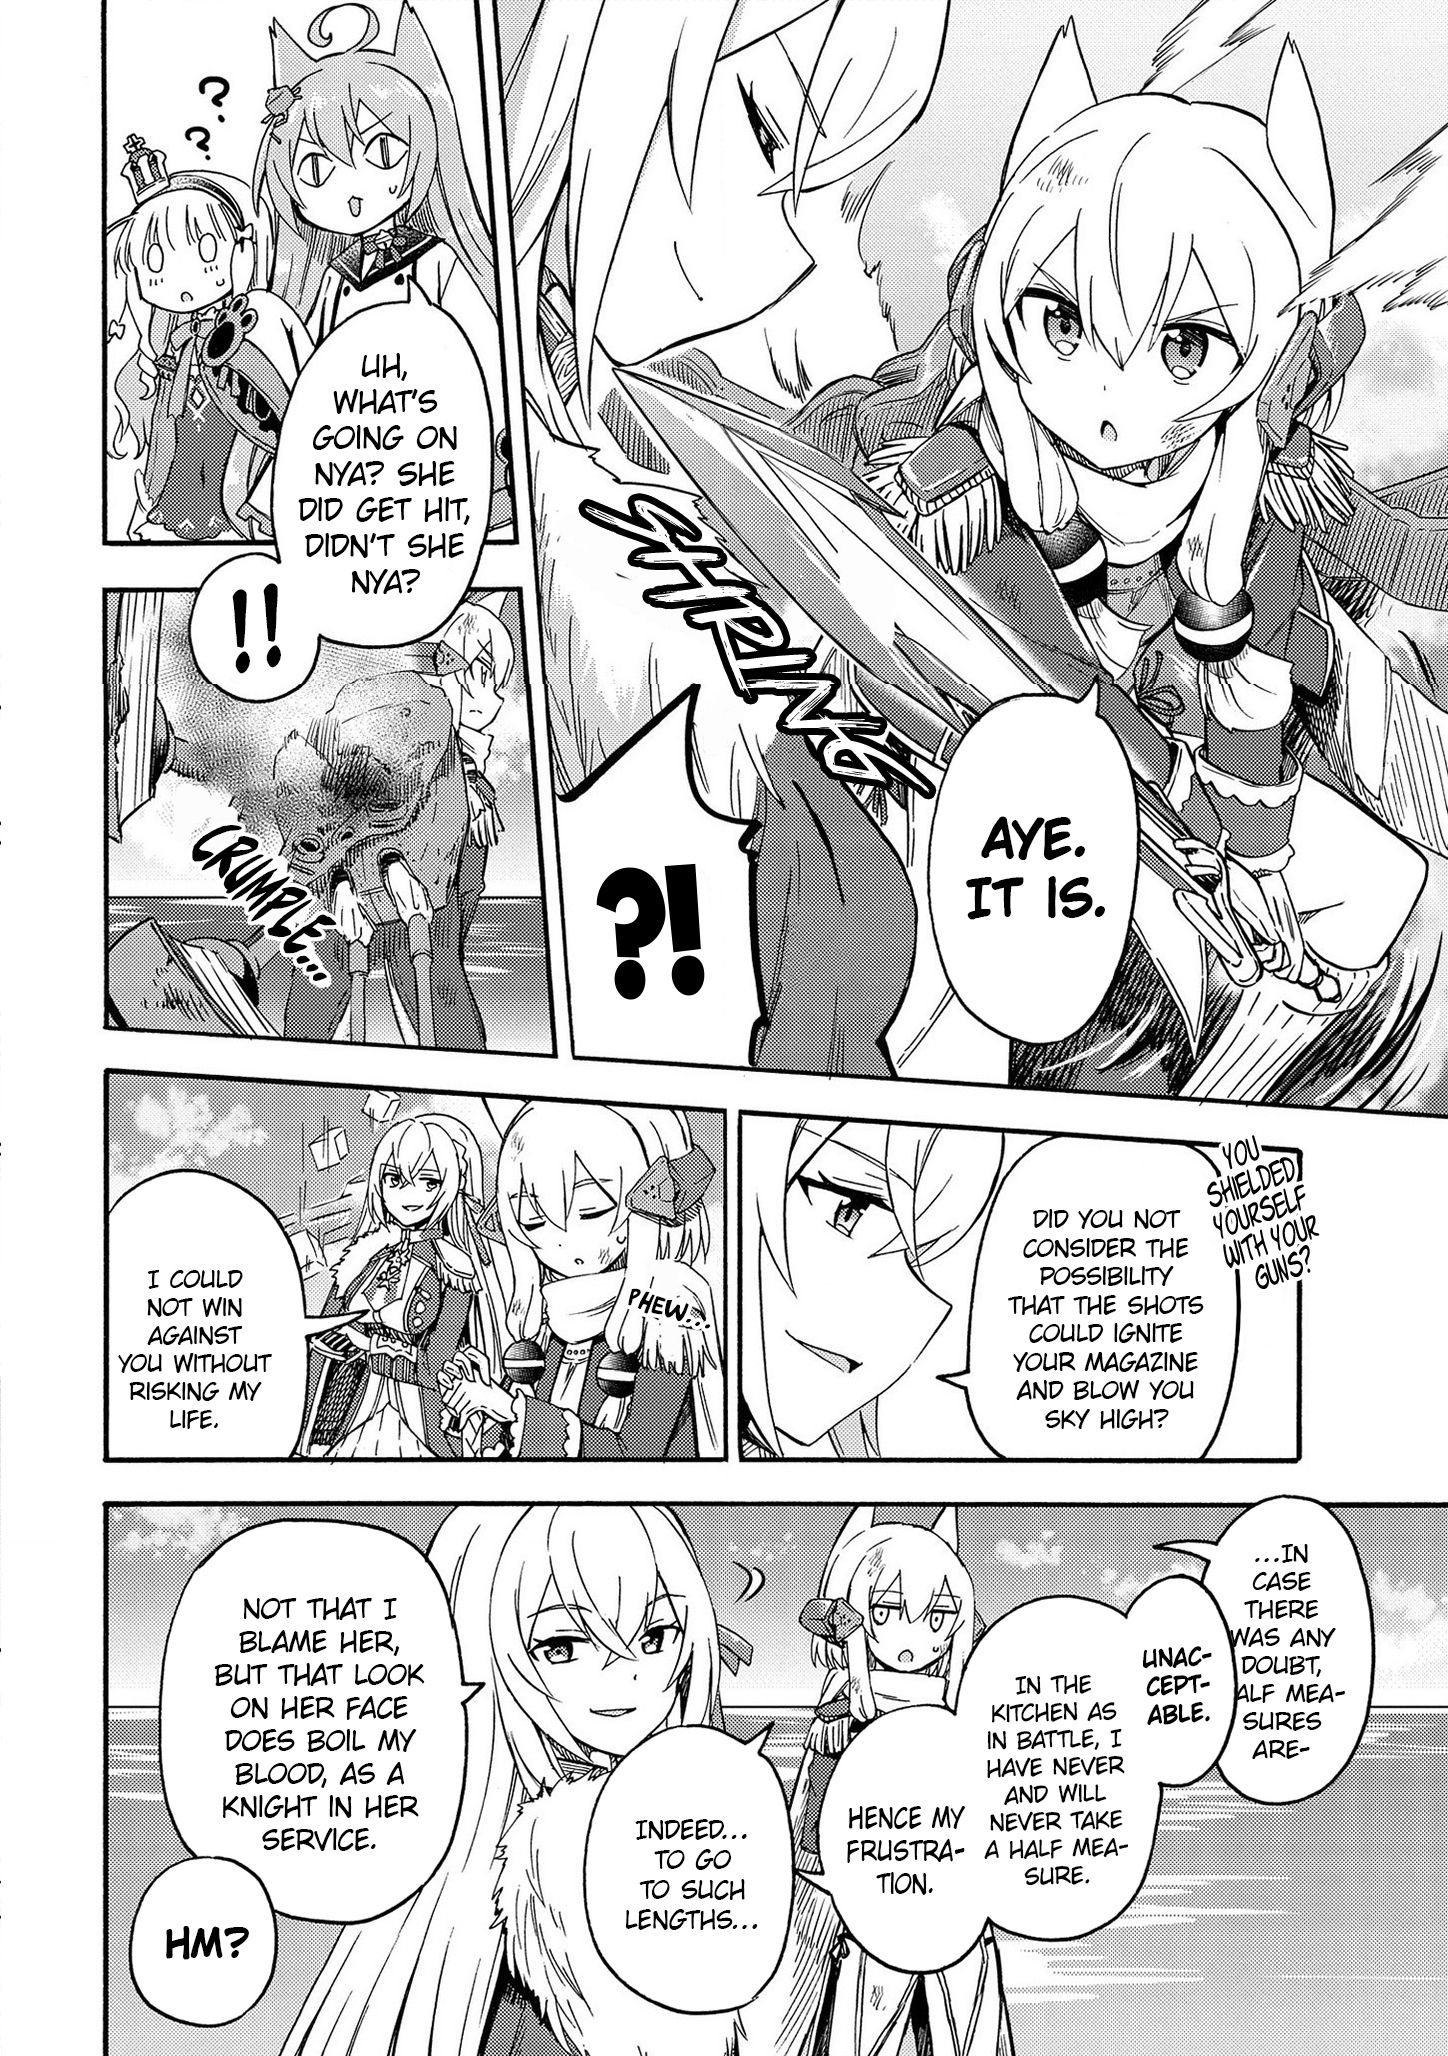 Azur Lane: Queen's Orders chapter 76 page 1